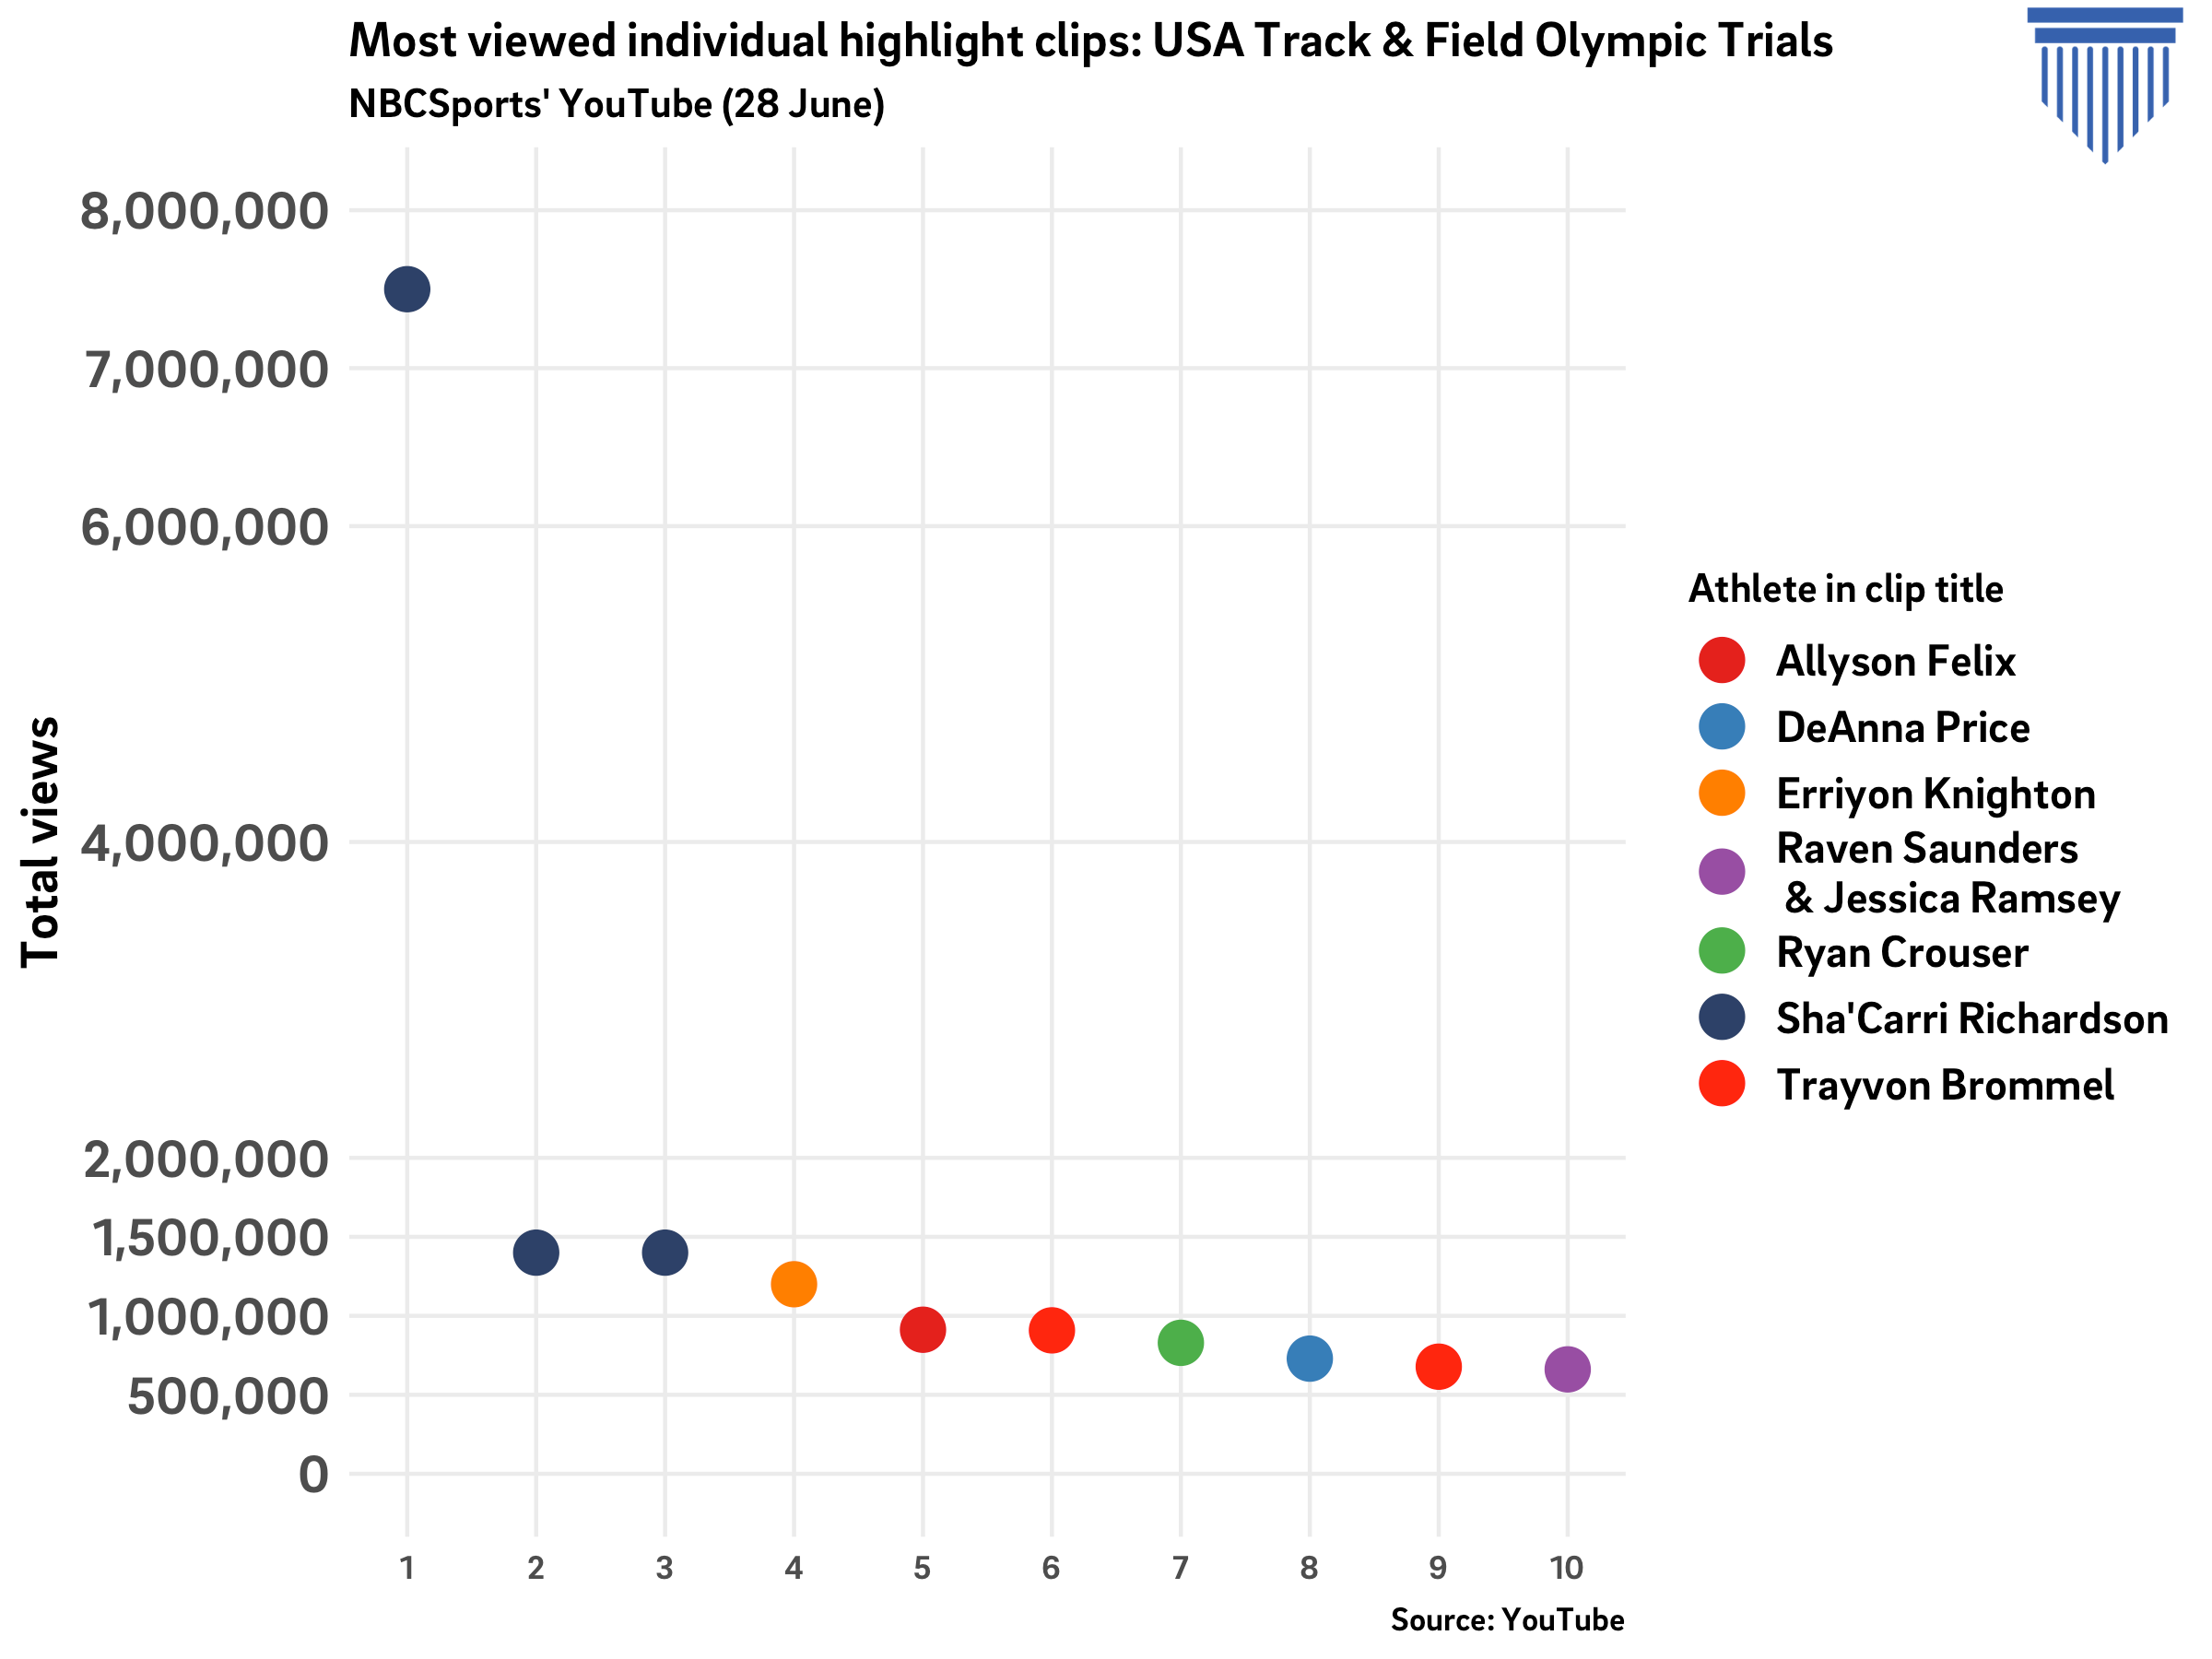 USA Track & Field Olympic Trials: Average views per event group on NBCSports YouTube